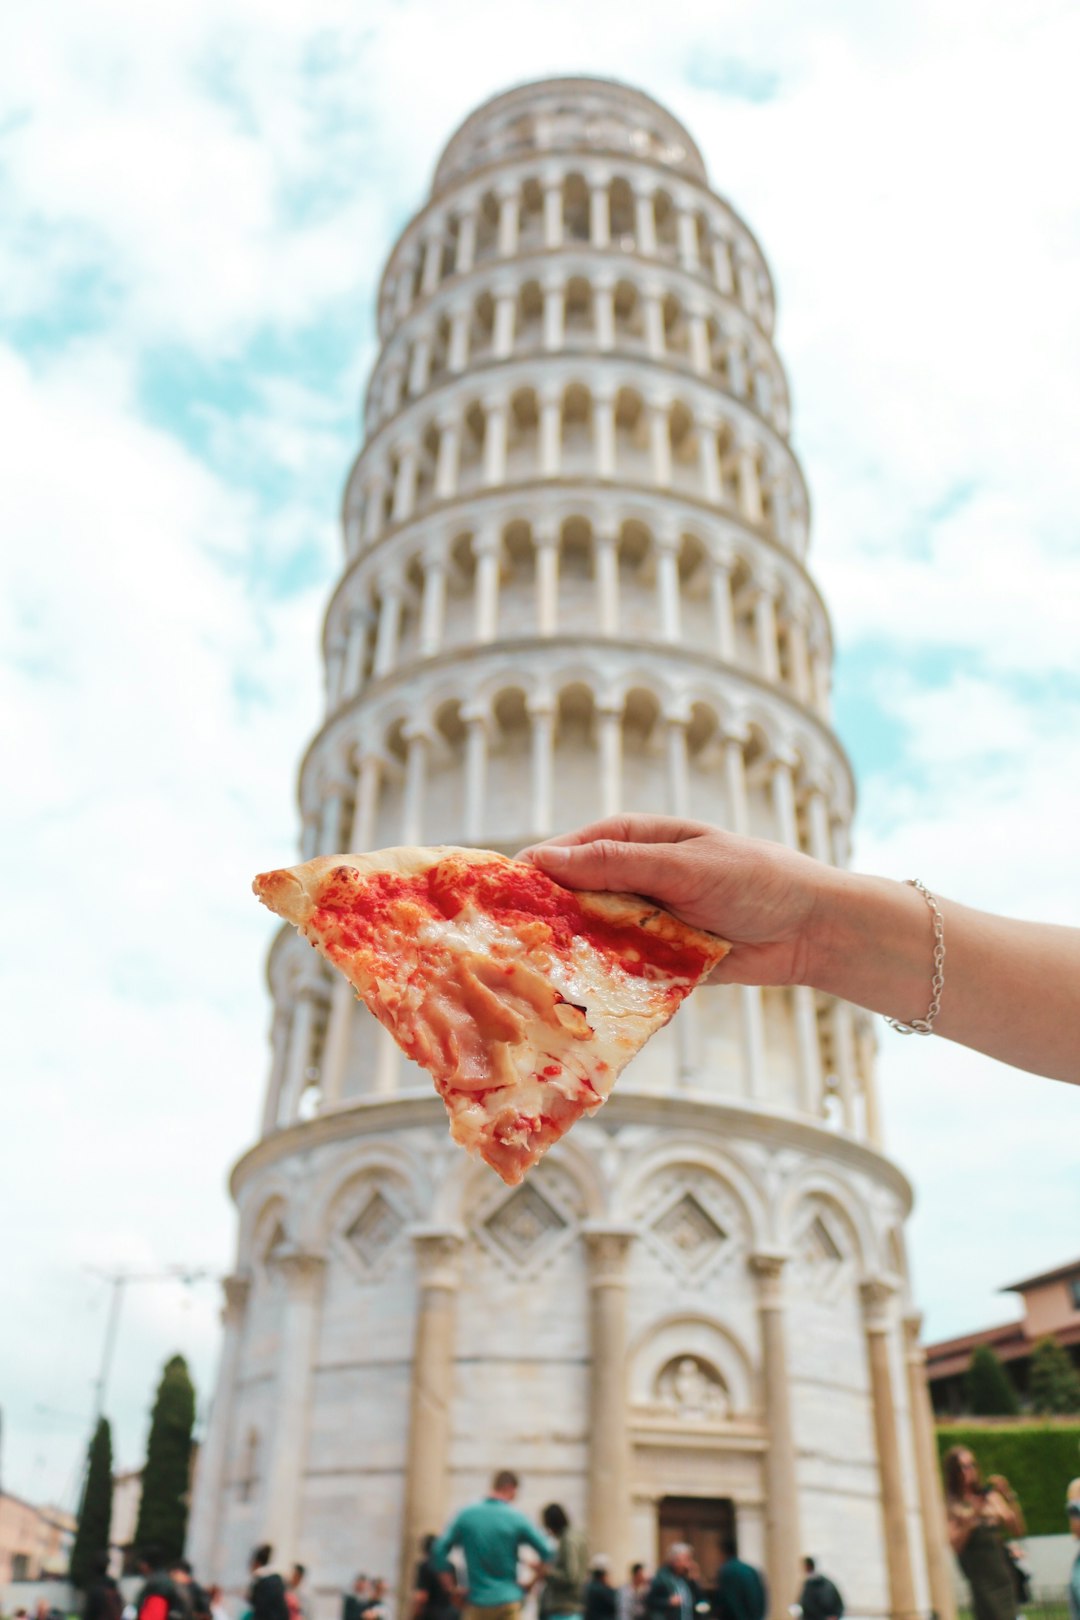 Travel Tips and Stories of Leaning Tower of Pisa in Italy